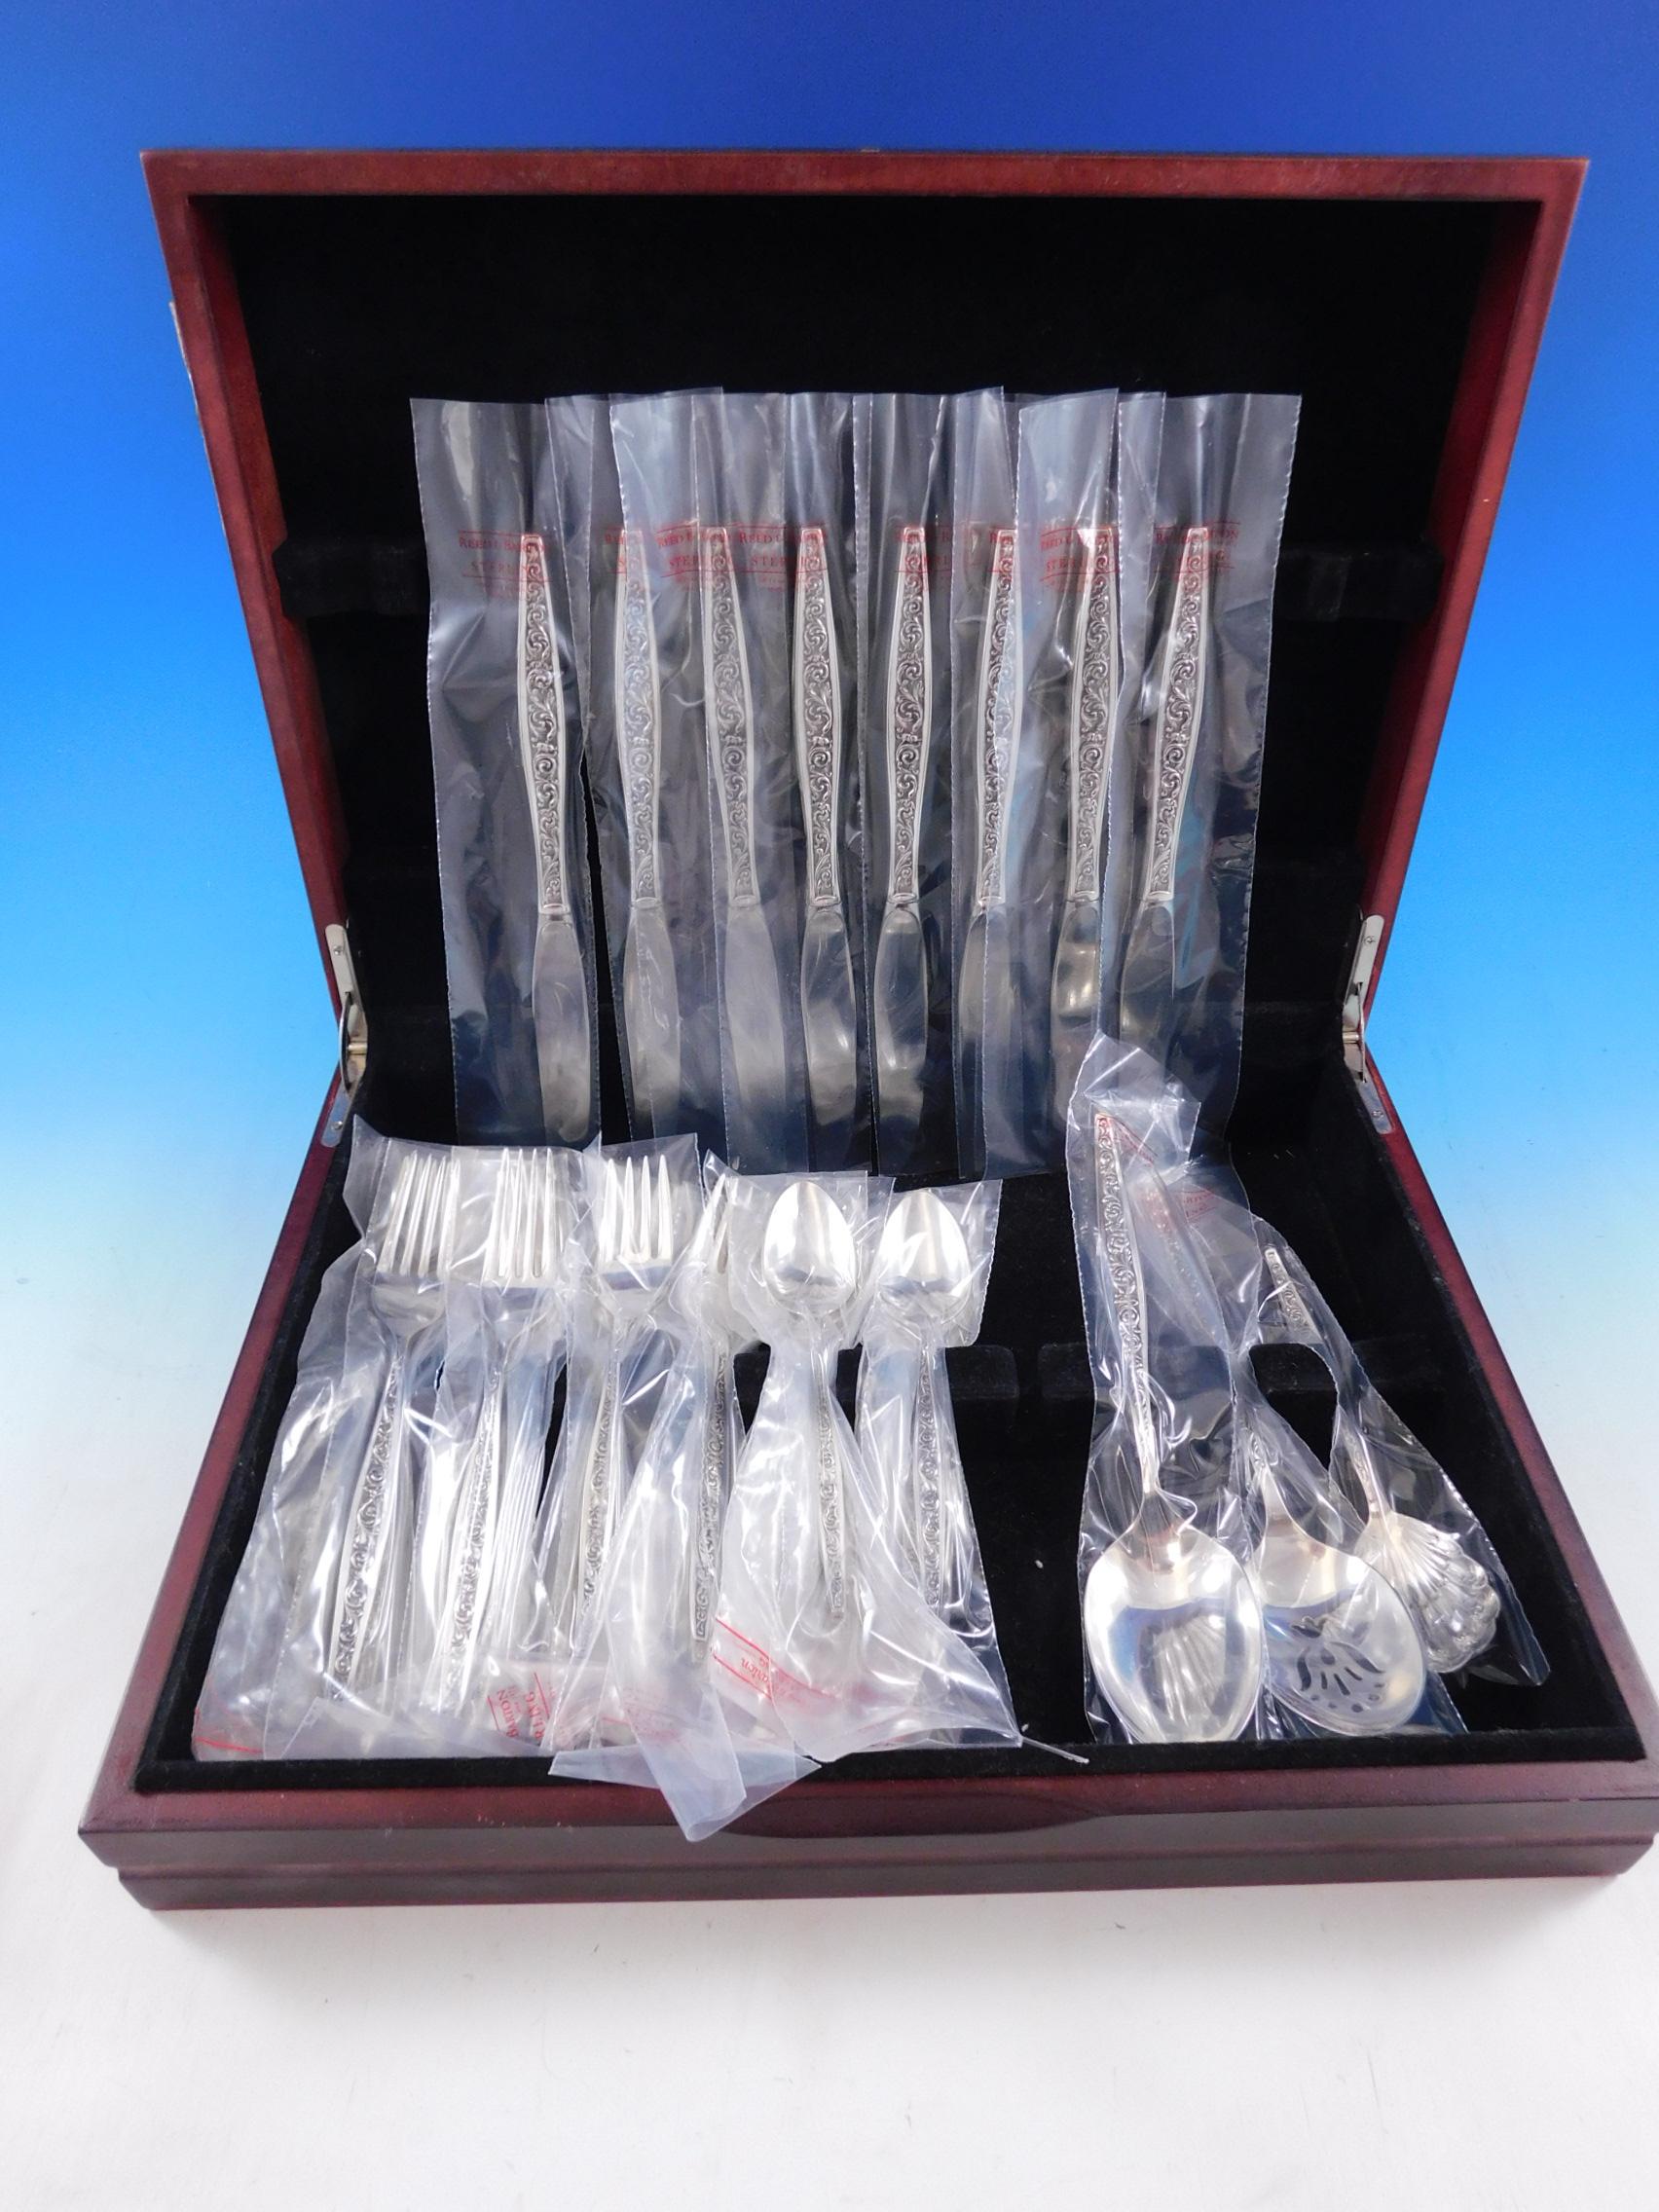 Unused Renaissance scroll by Reed and Barton sterling silver flatware set - 35 pieces. This set includes:

8 knives, 9 1/8